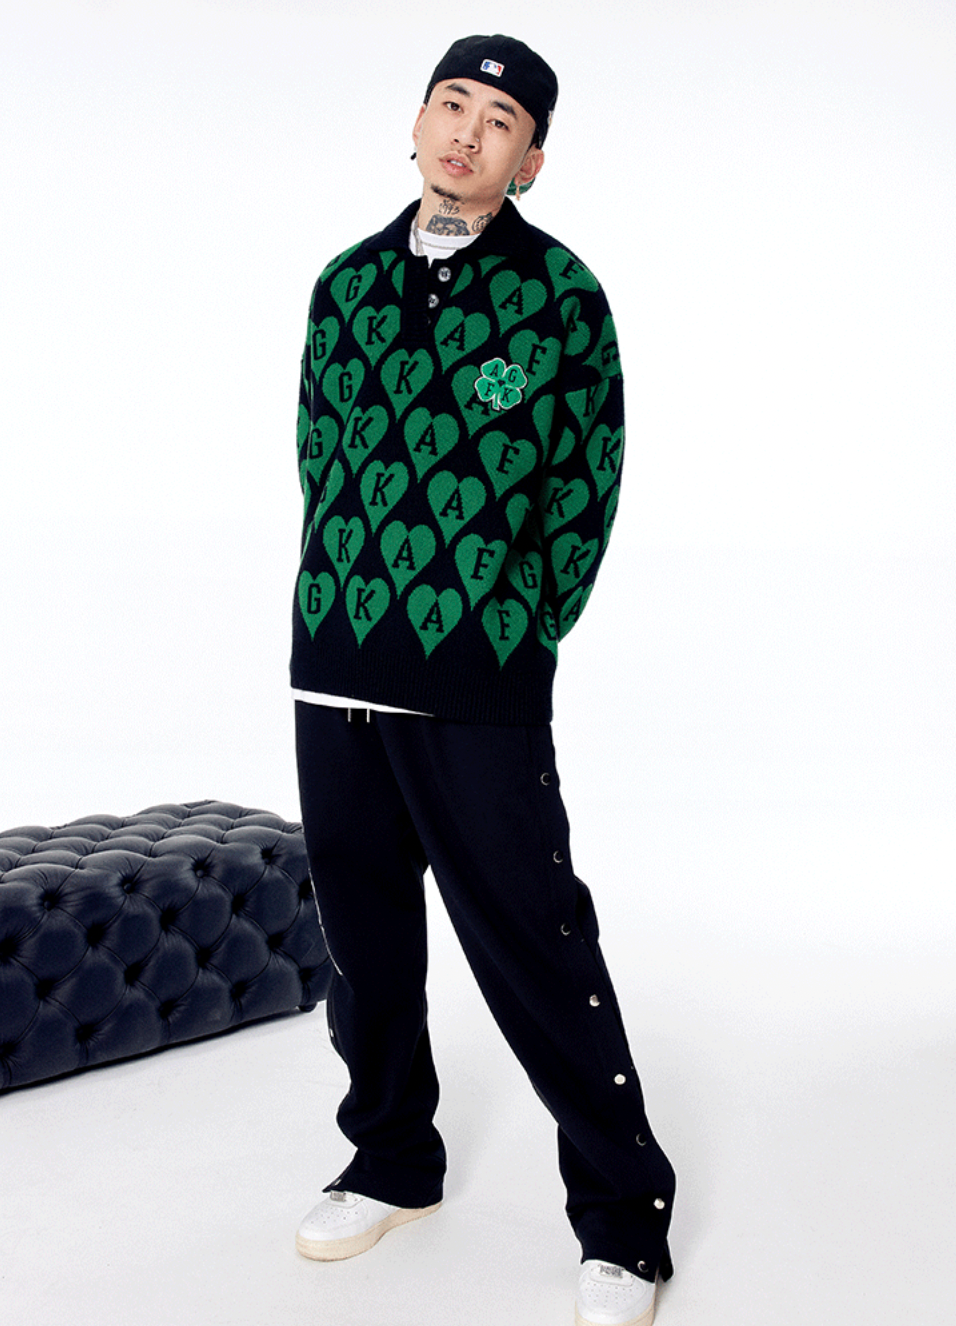 AFGK All-Over Print Logo Knit Sweater